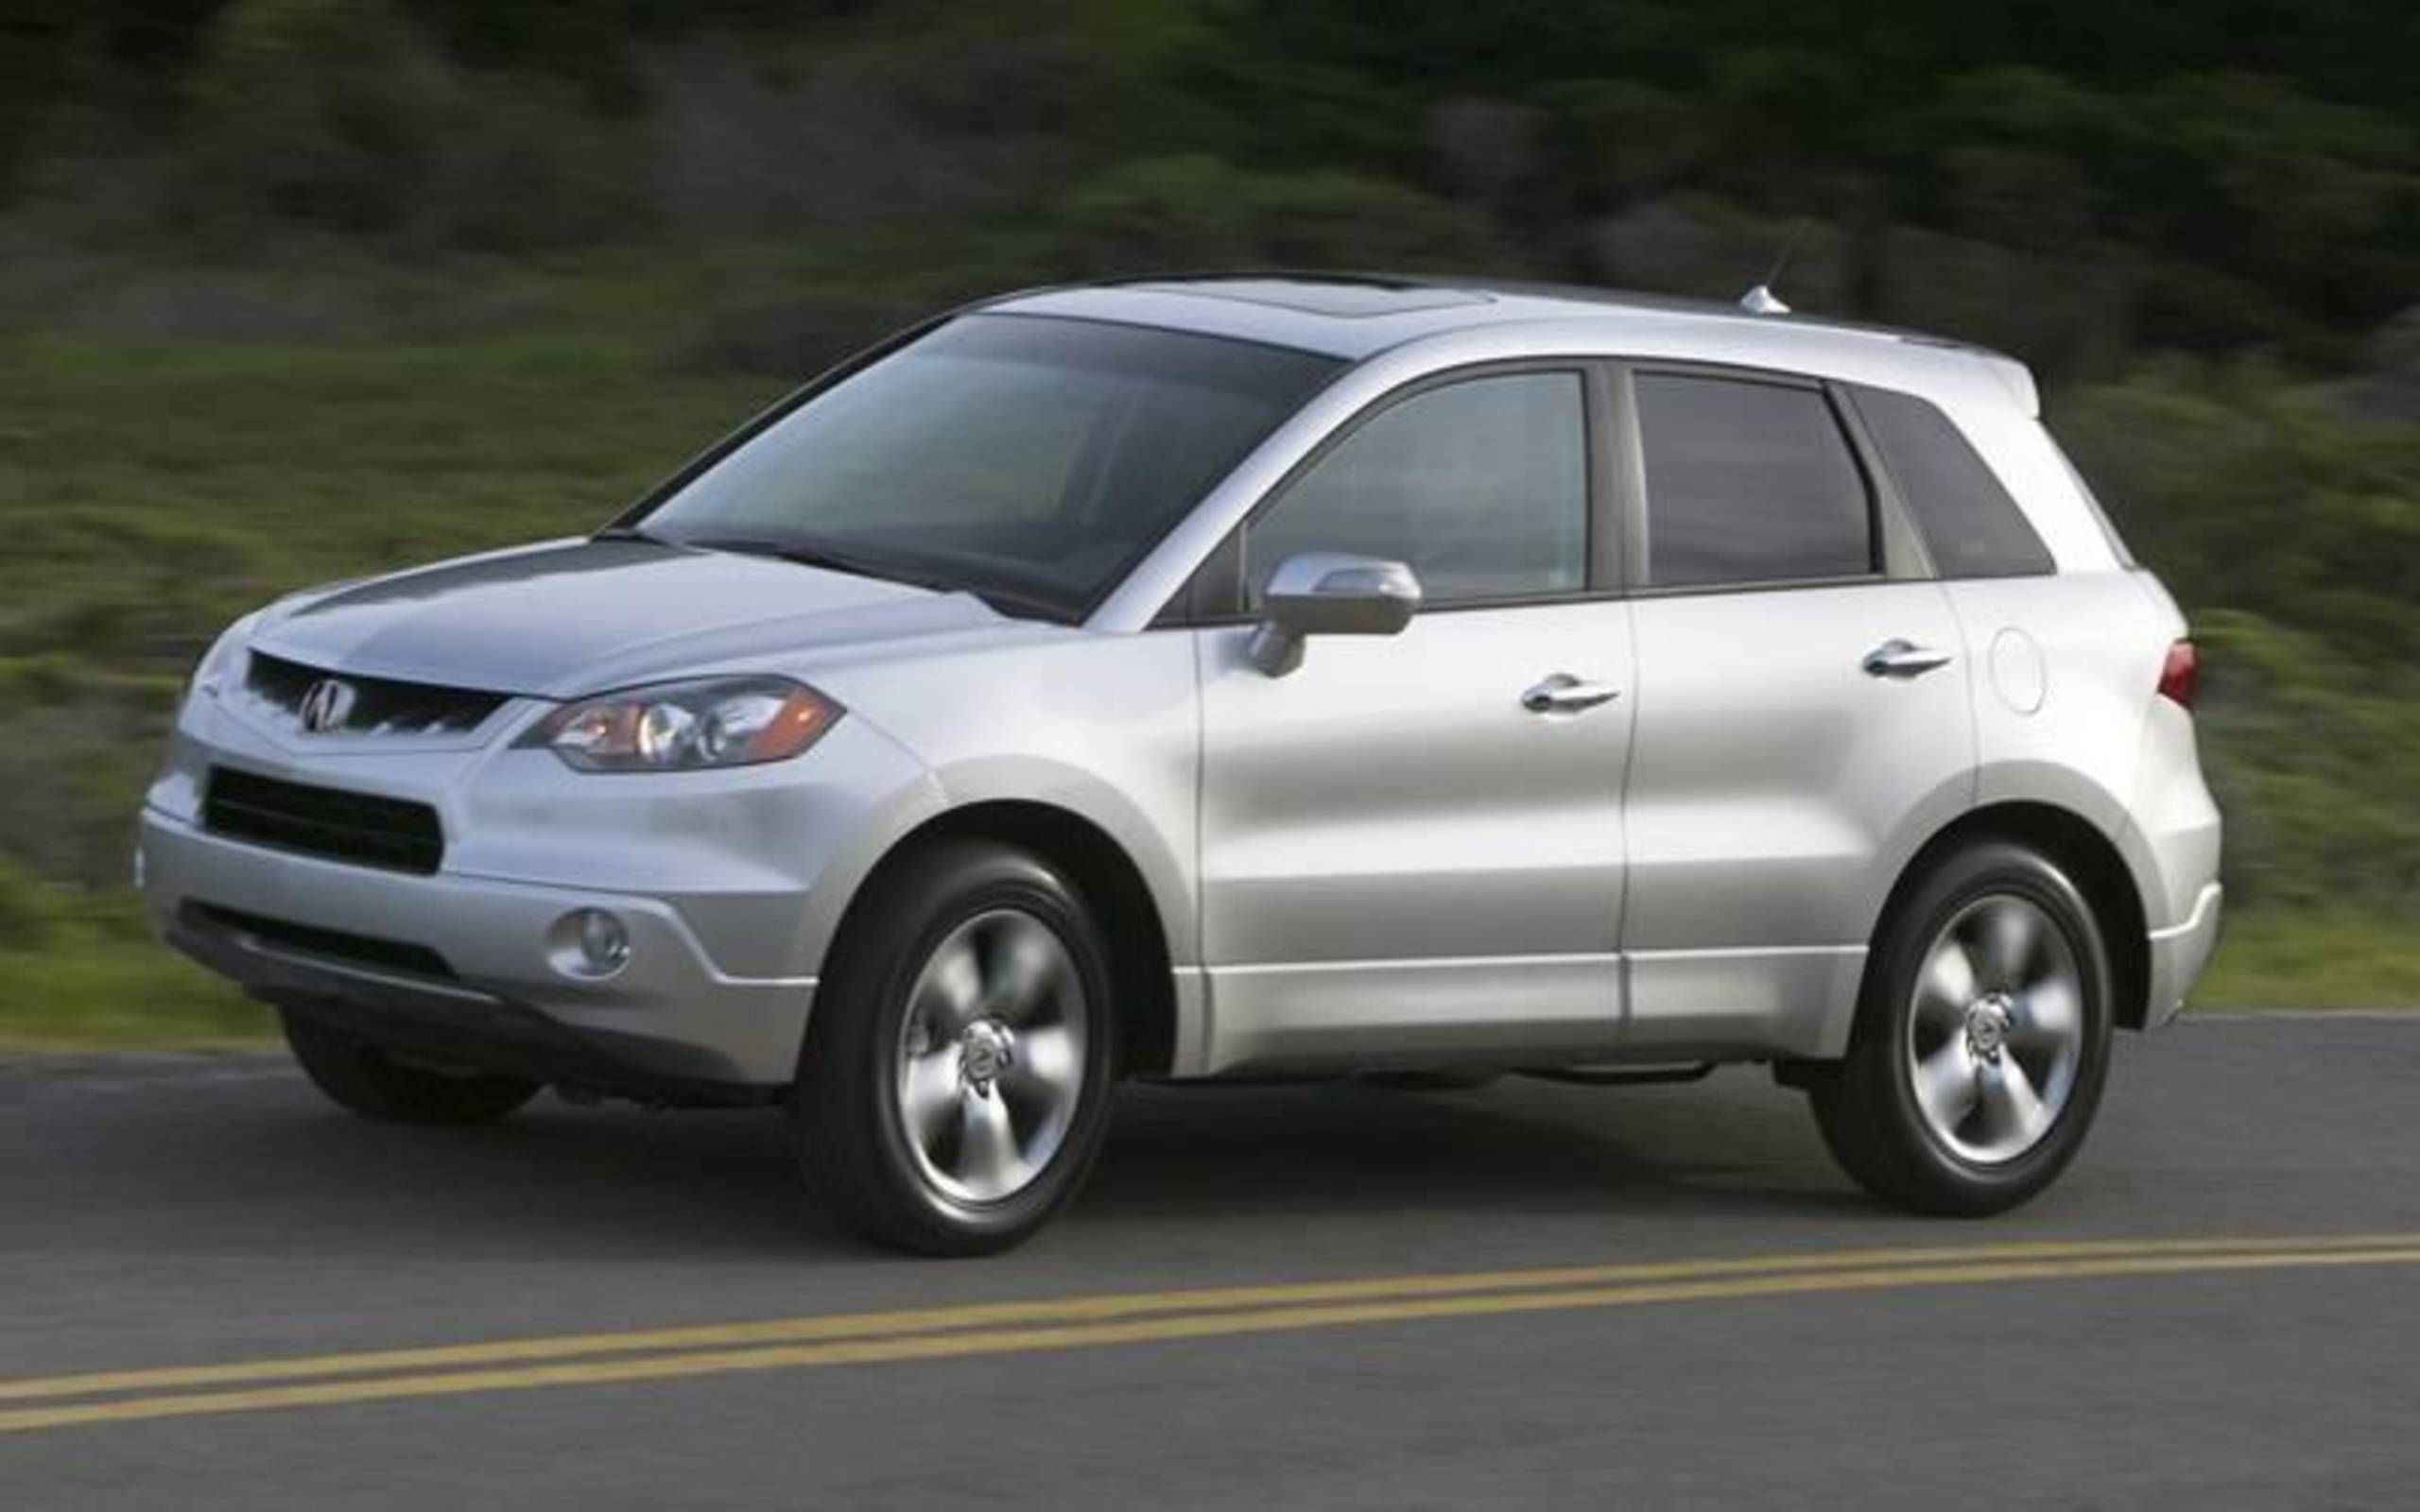 2007 Acura RDX: Acura's dive into forced induction thrills owners